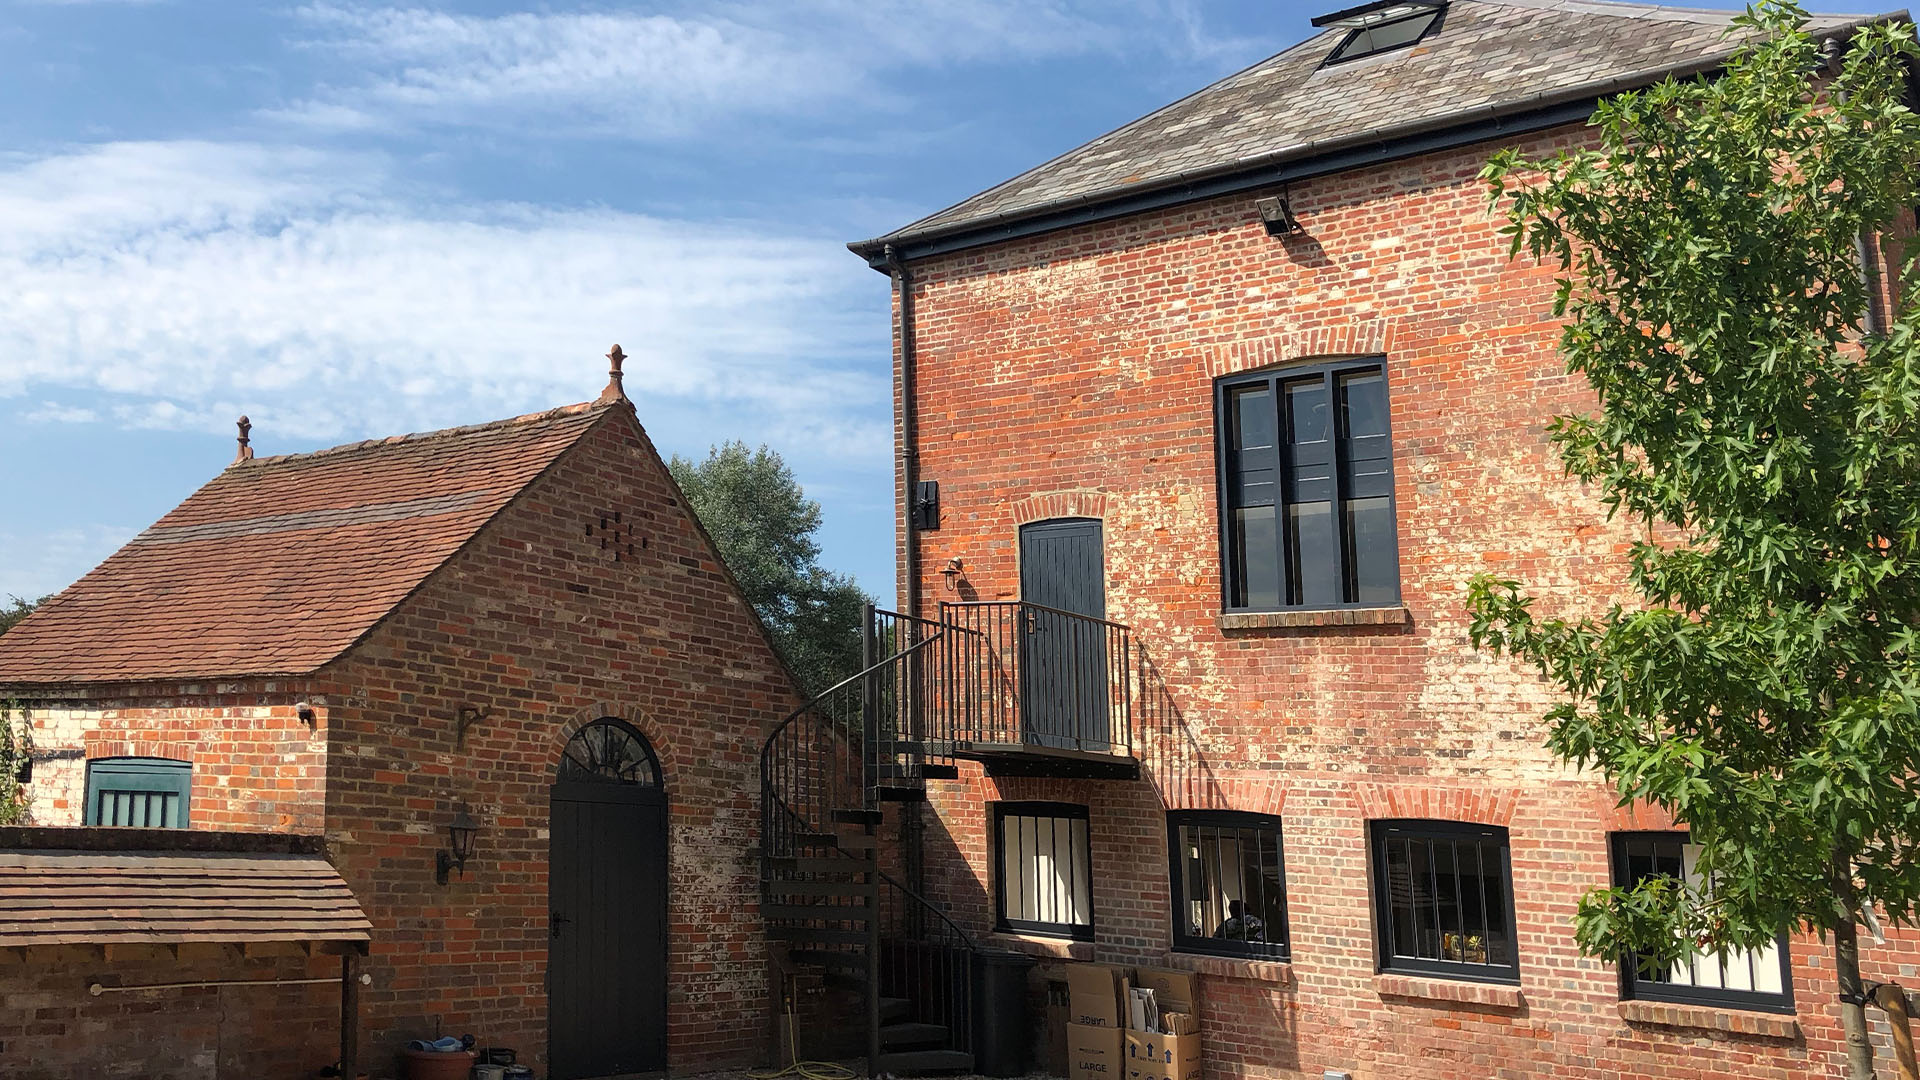 Conservation repairs to historic former working mill in West Sussex